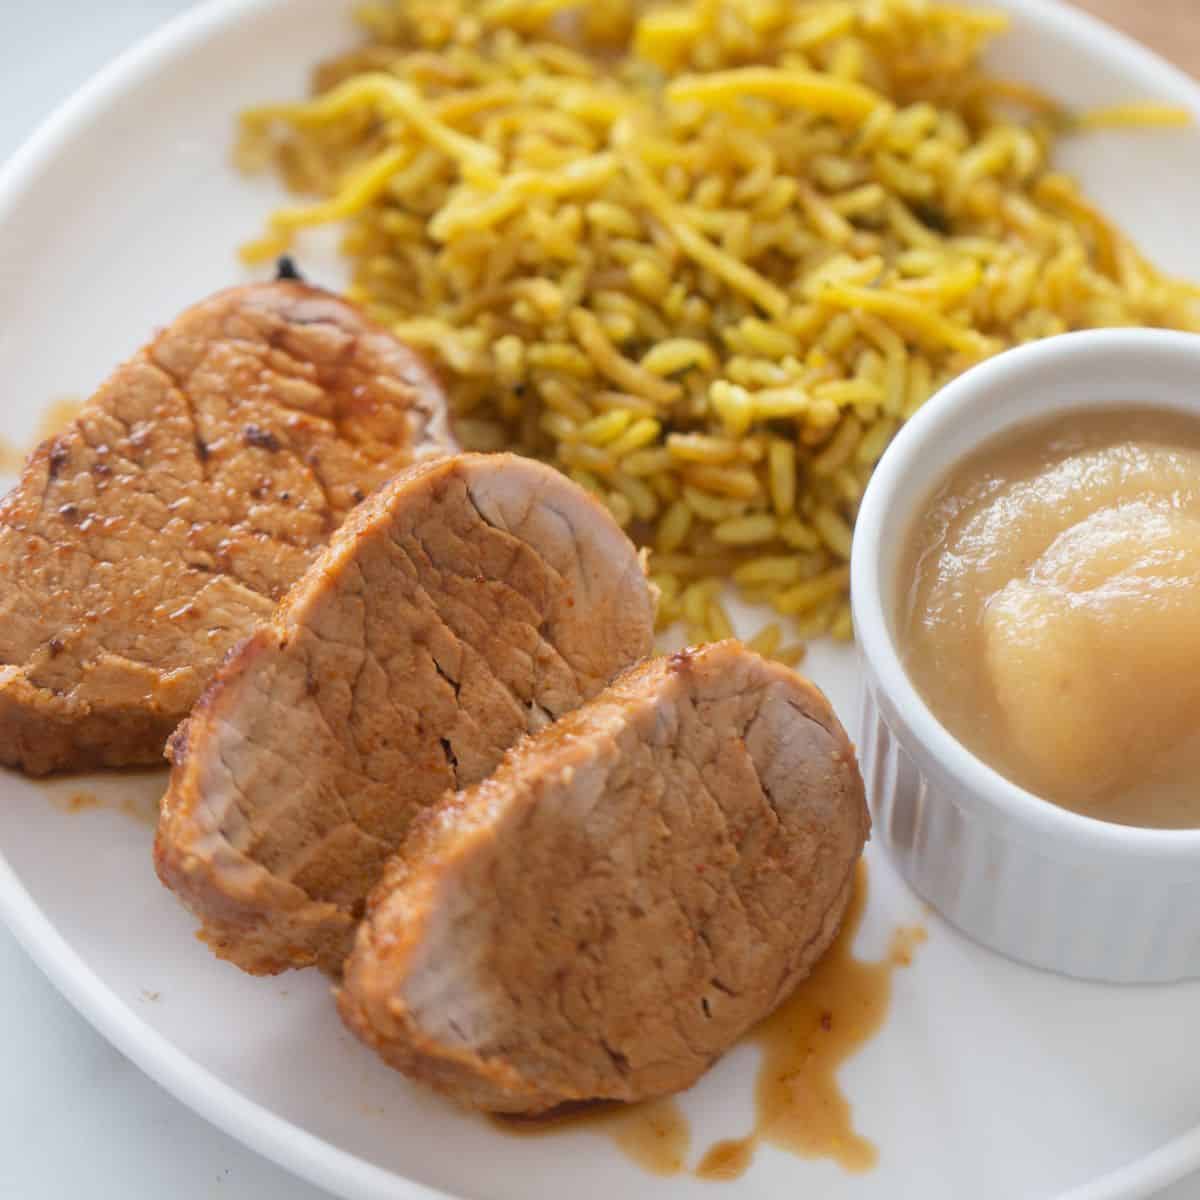 Plate with sliced air fryer pork tenderloin drizzled with juice, a side of homemade applesauce, and rice pilaf.